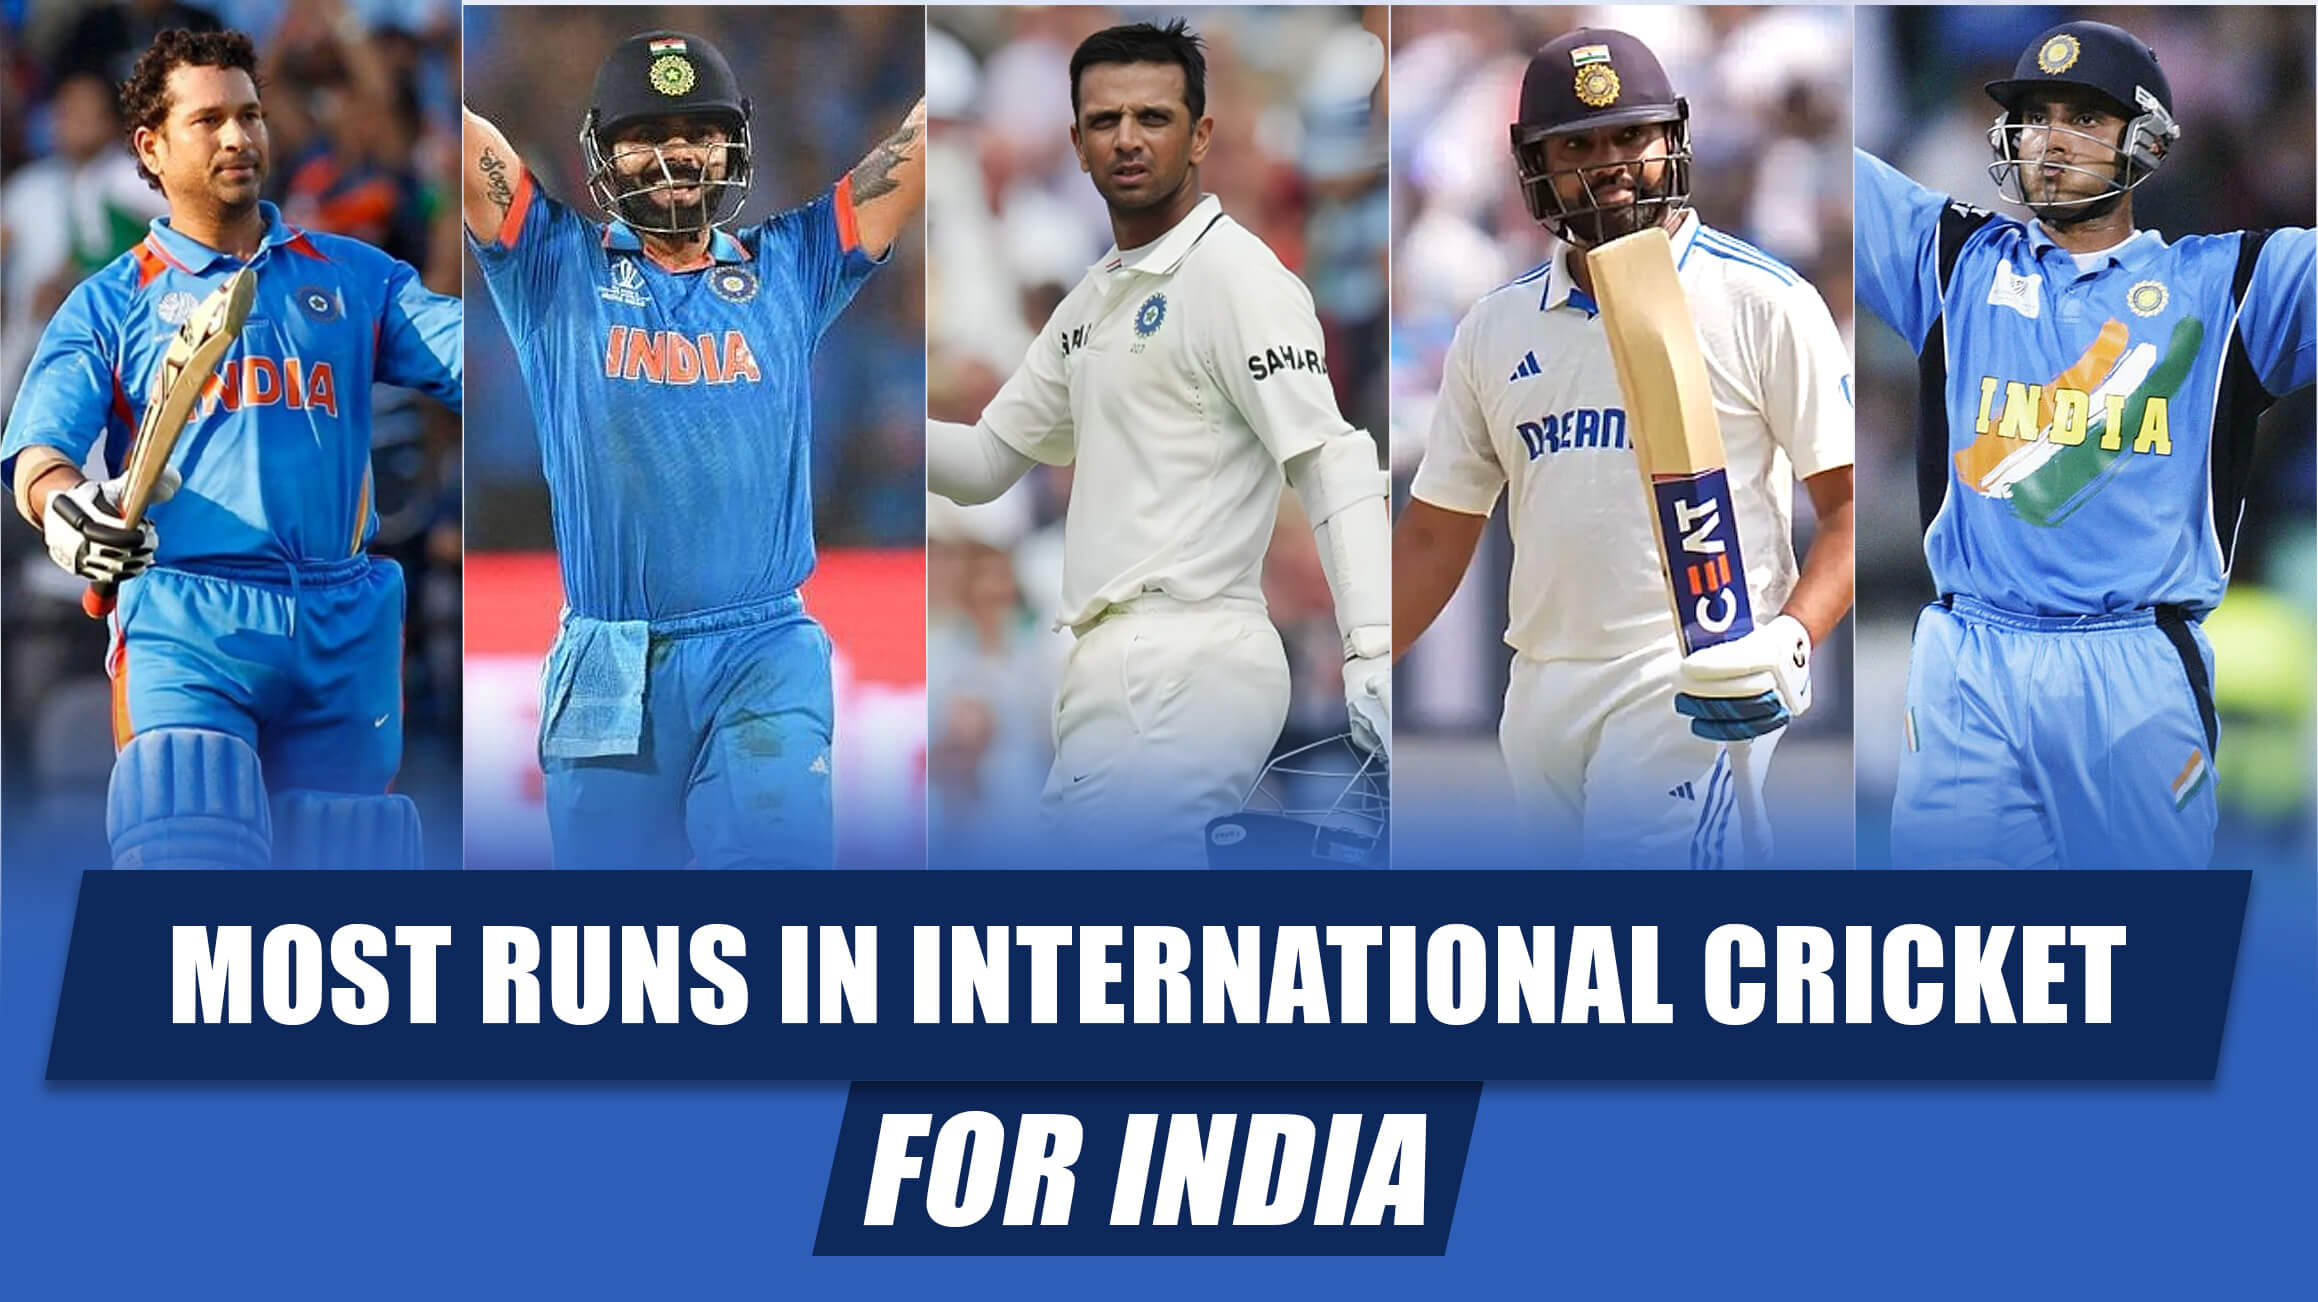 Most runs in International cricket for India